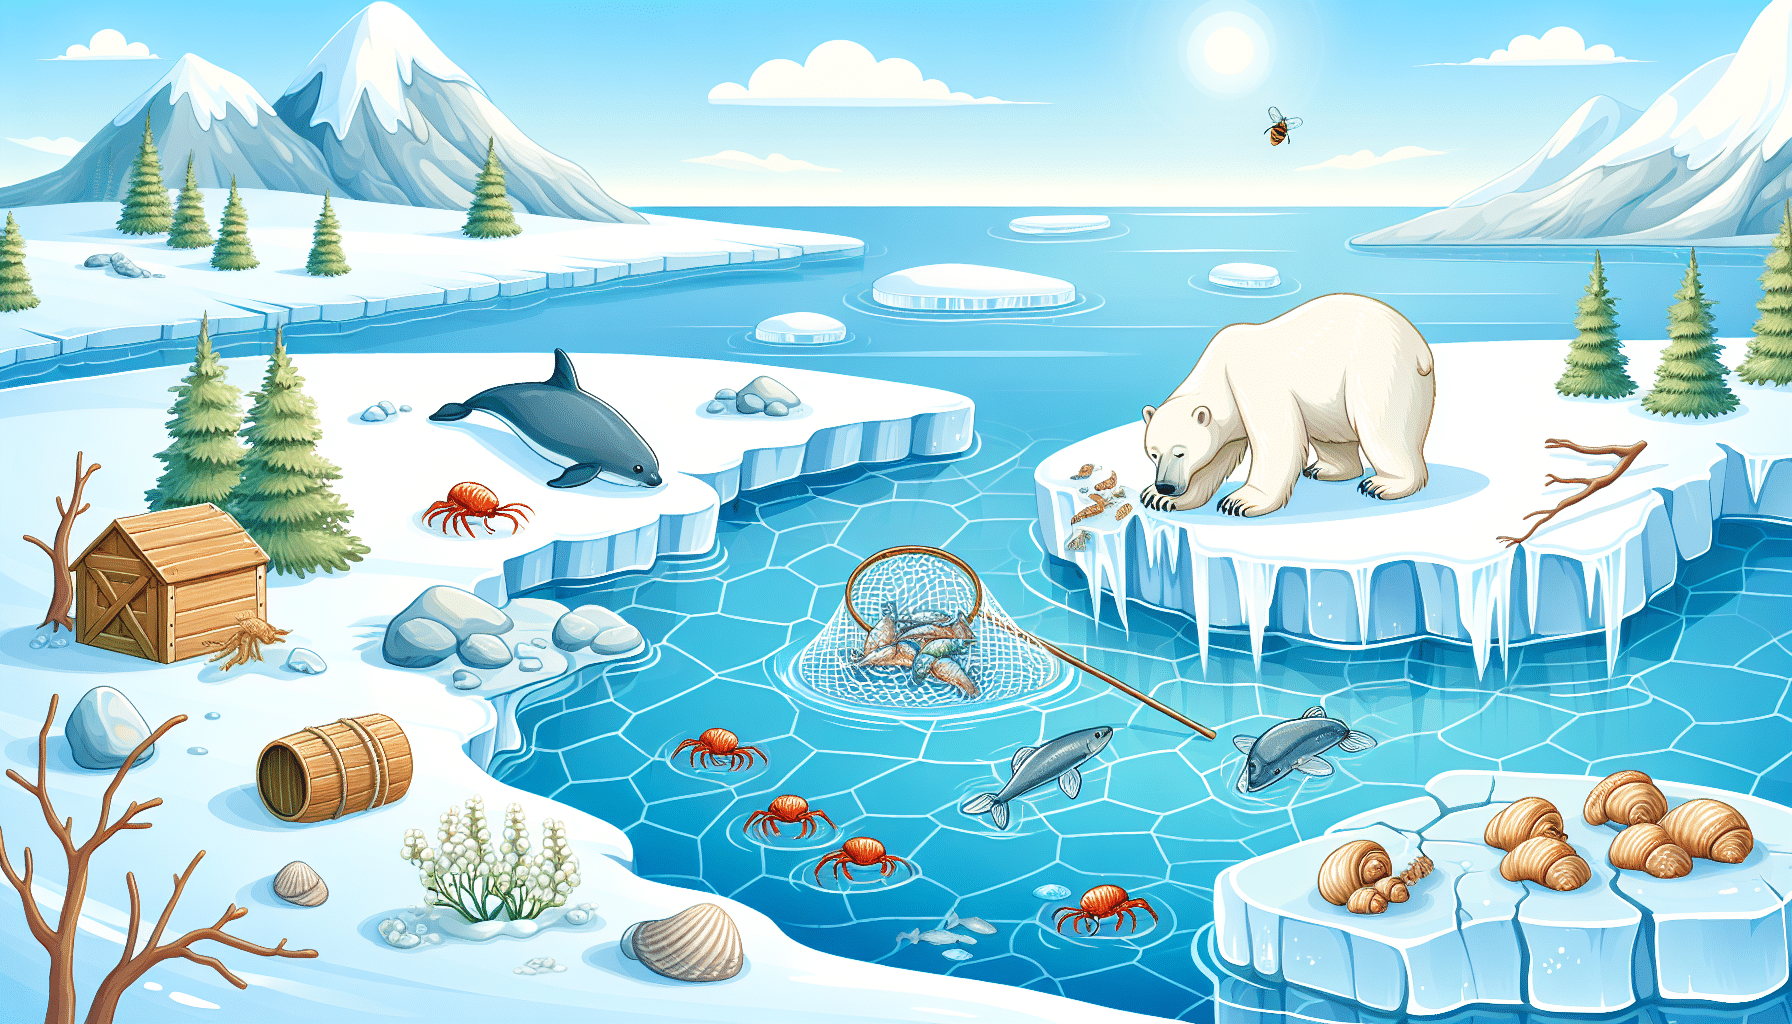 Illustrate an Arctic landscape where a polar bear is netting fish from a cracked ice surface near icy waters. Display a seal basking on an iceberg nearby. As well as some clams and crustaceans crawling on the snowy land. Depict a beehive in a leafless tree, signifying a diverse diet that includes honey. Avoid depictions of any human figures, brands, or text within the scenery.